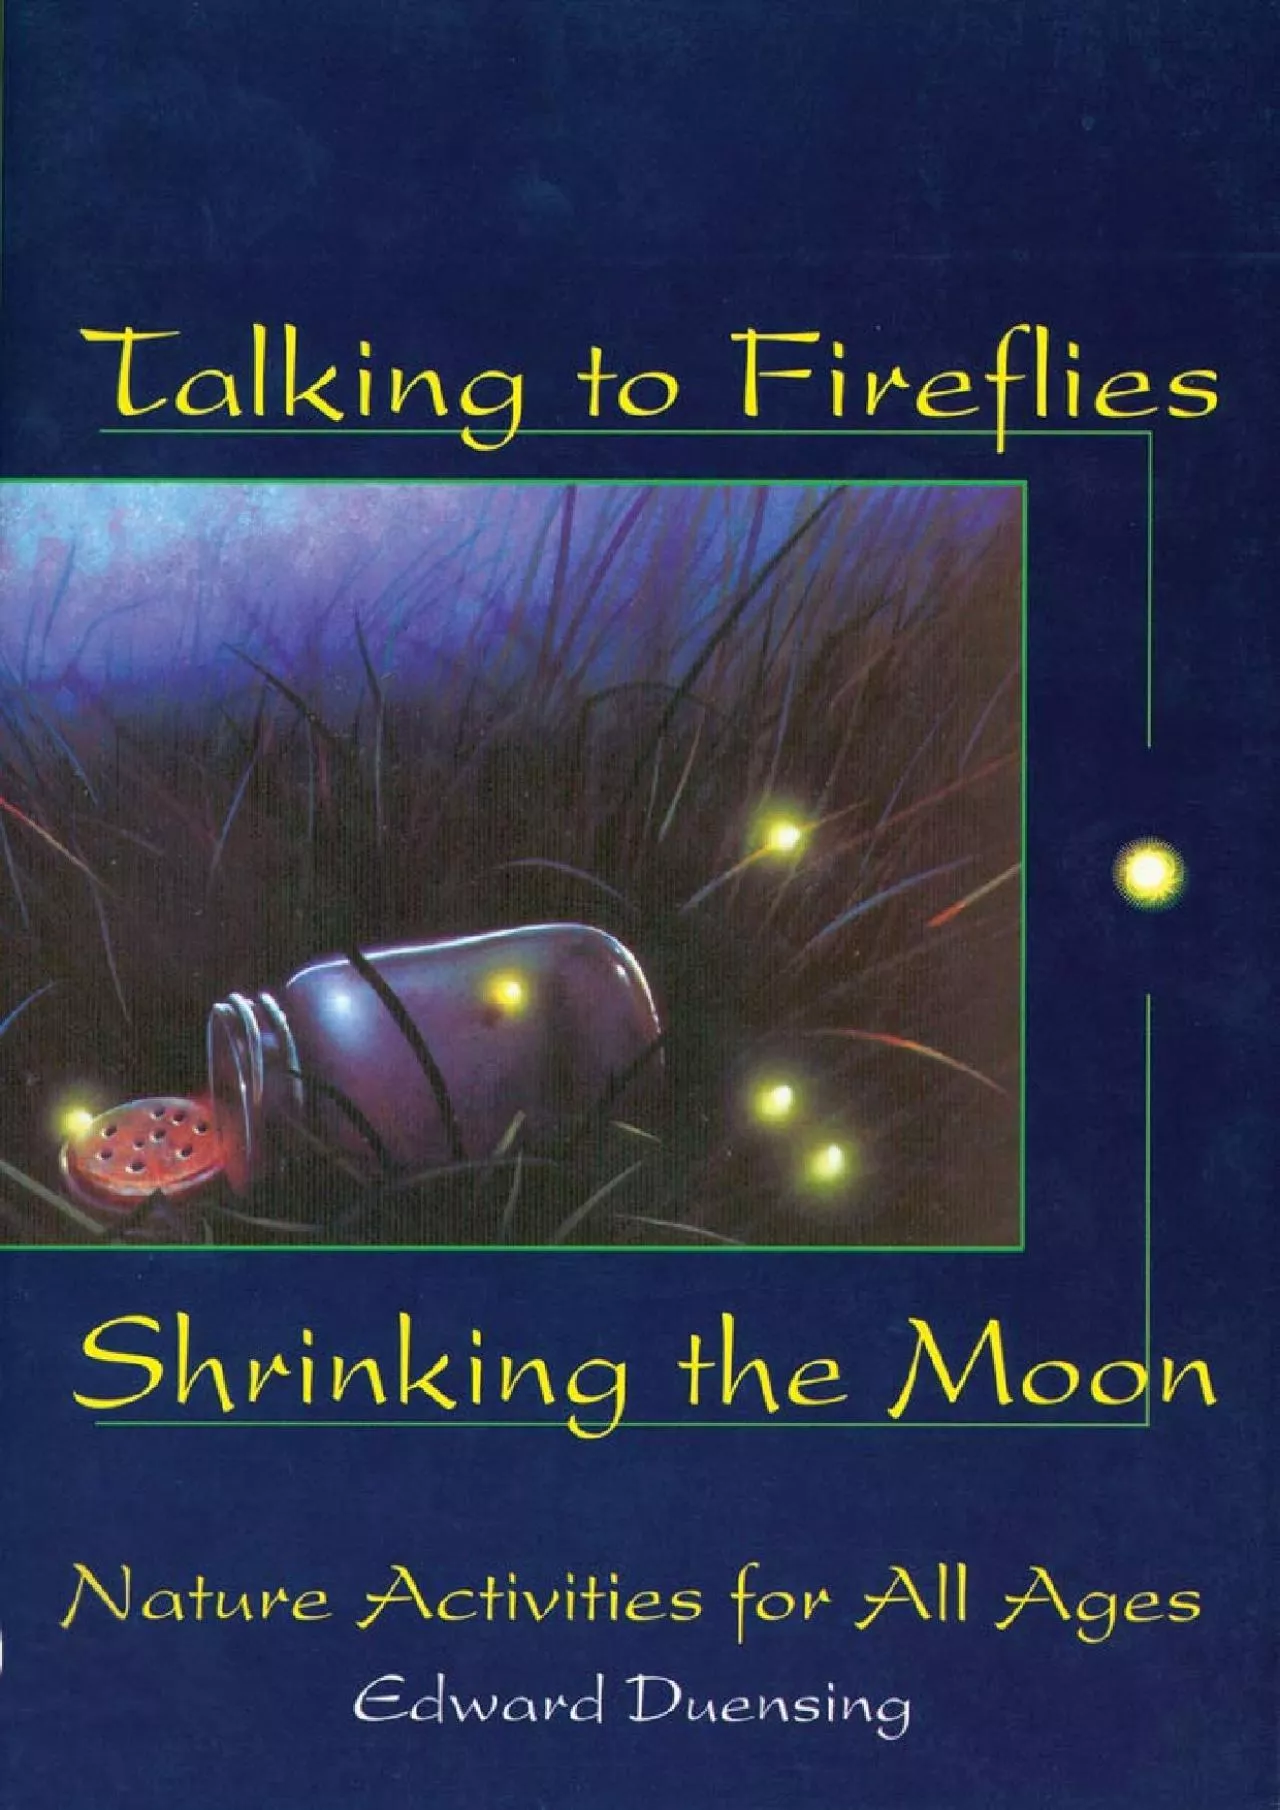 [EBOOK]-Talking to Fireflies, Shrinking the Moon: Nature Activities for All Ages